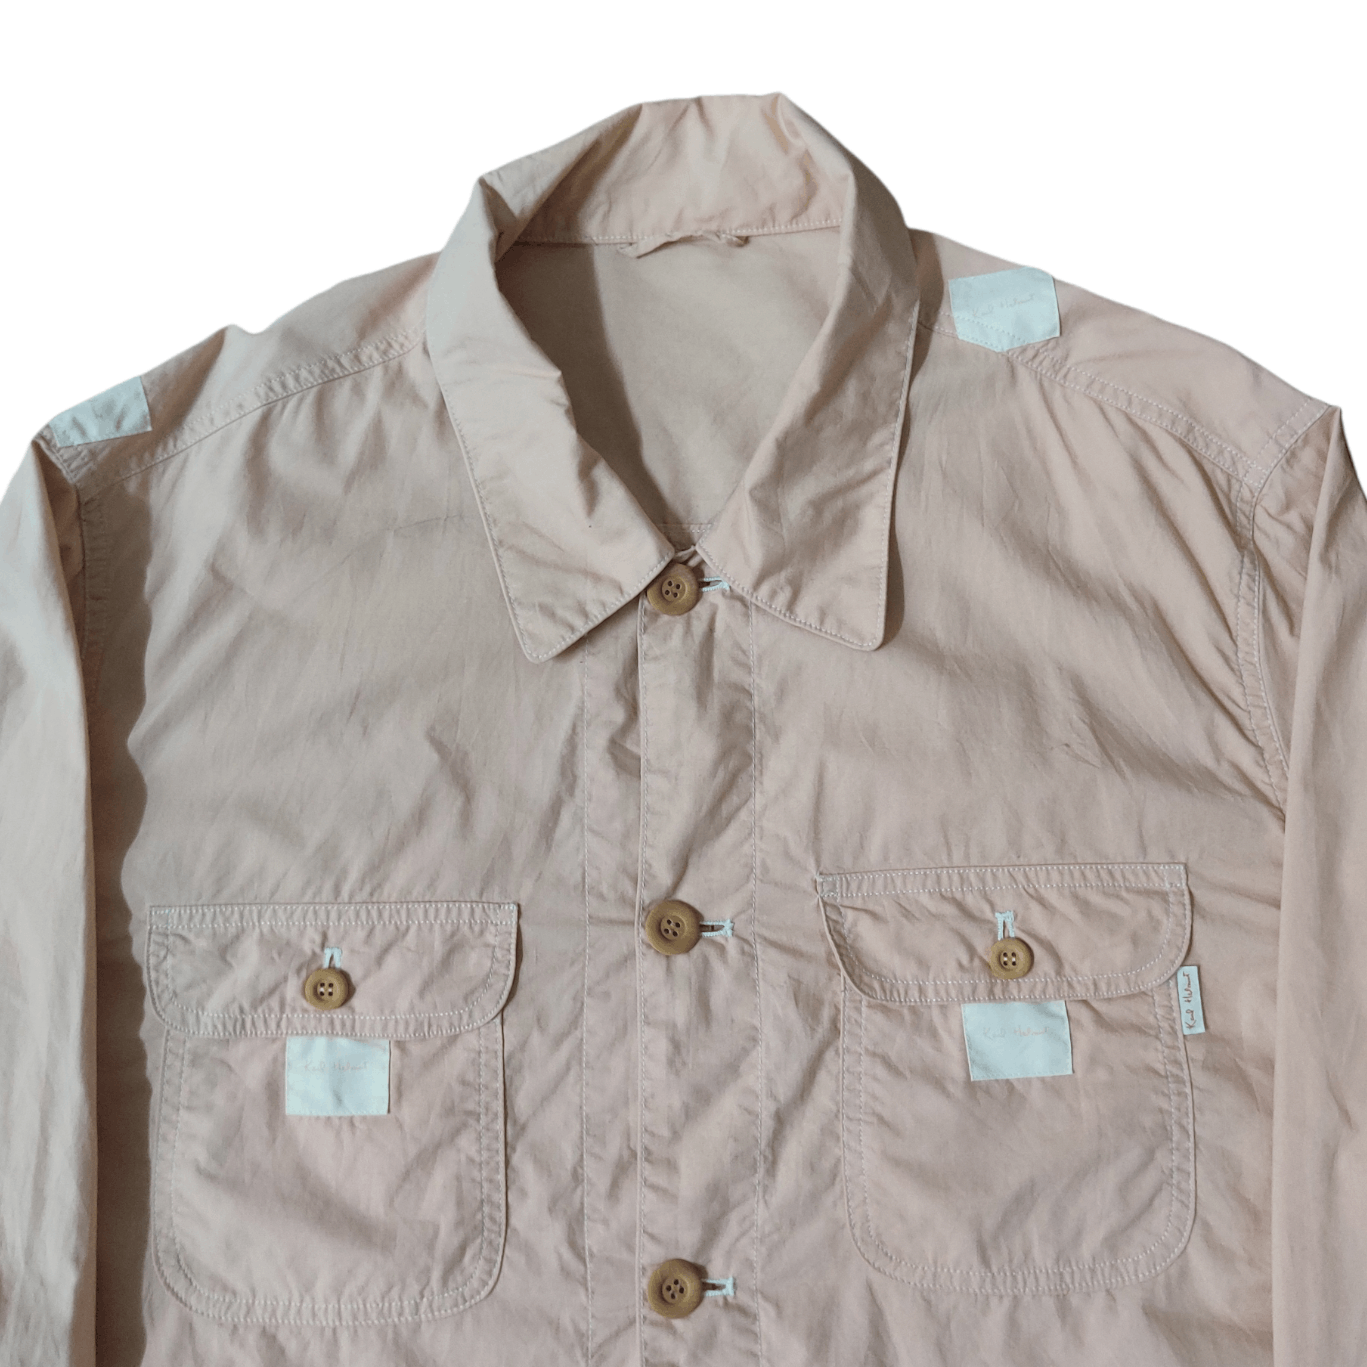 Vintage Karl Helmut Patches Shirt Button Up - 4